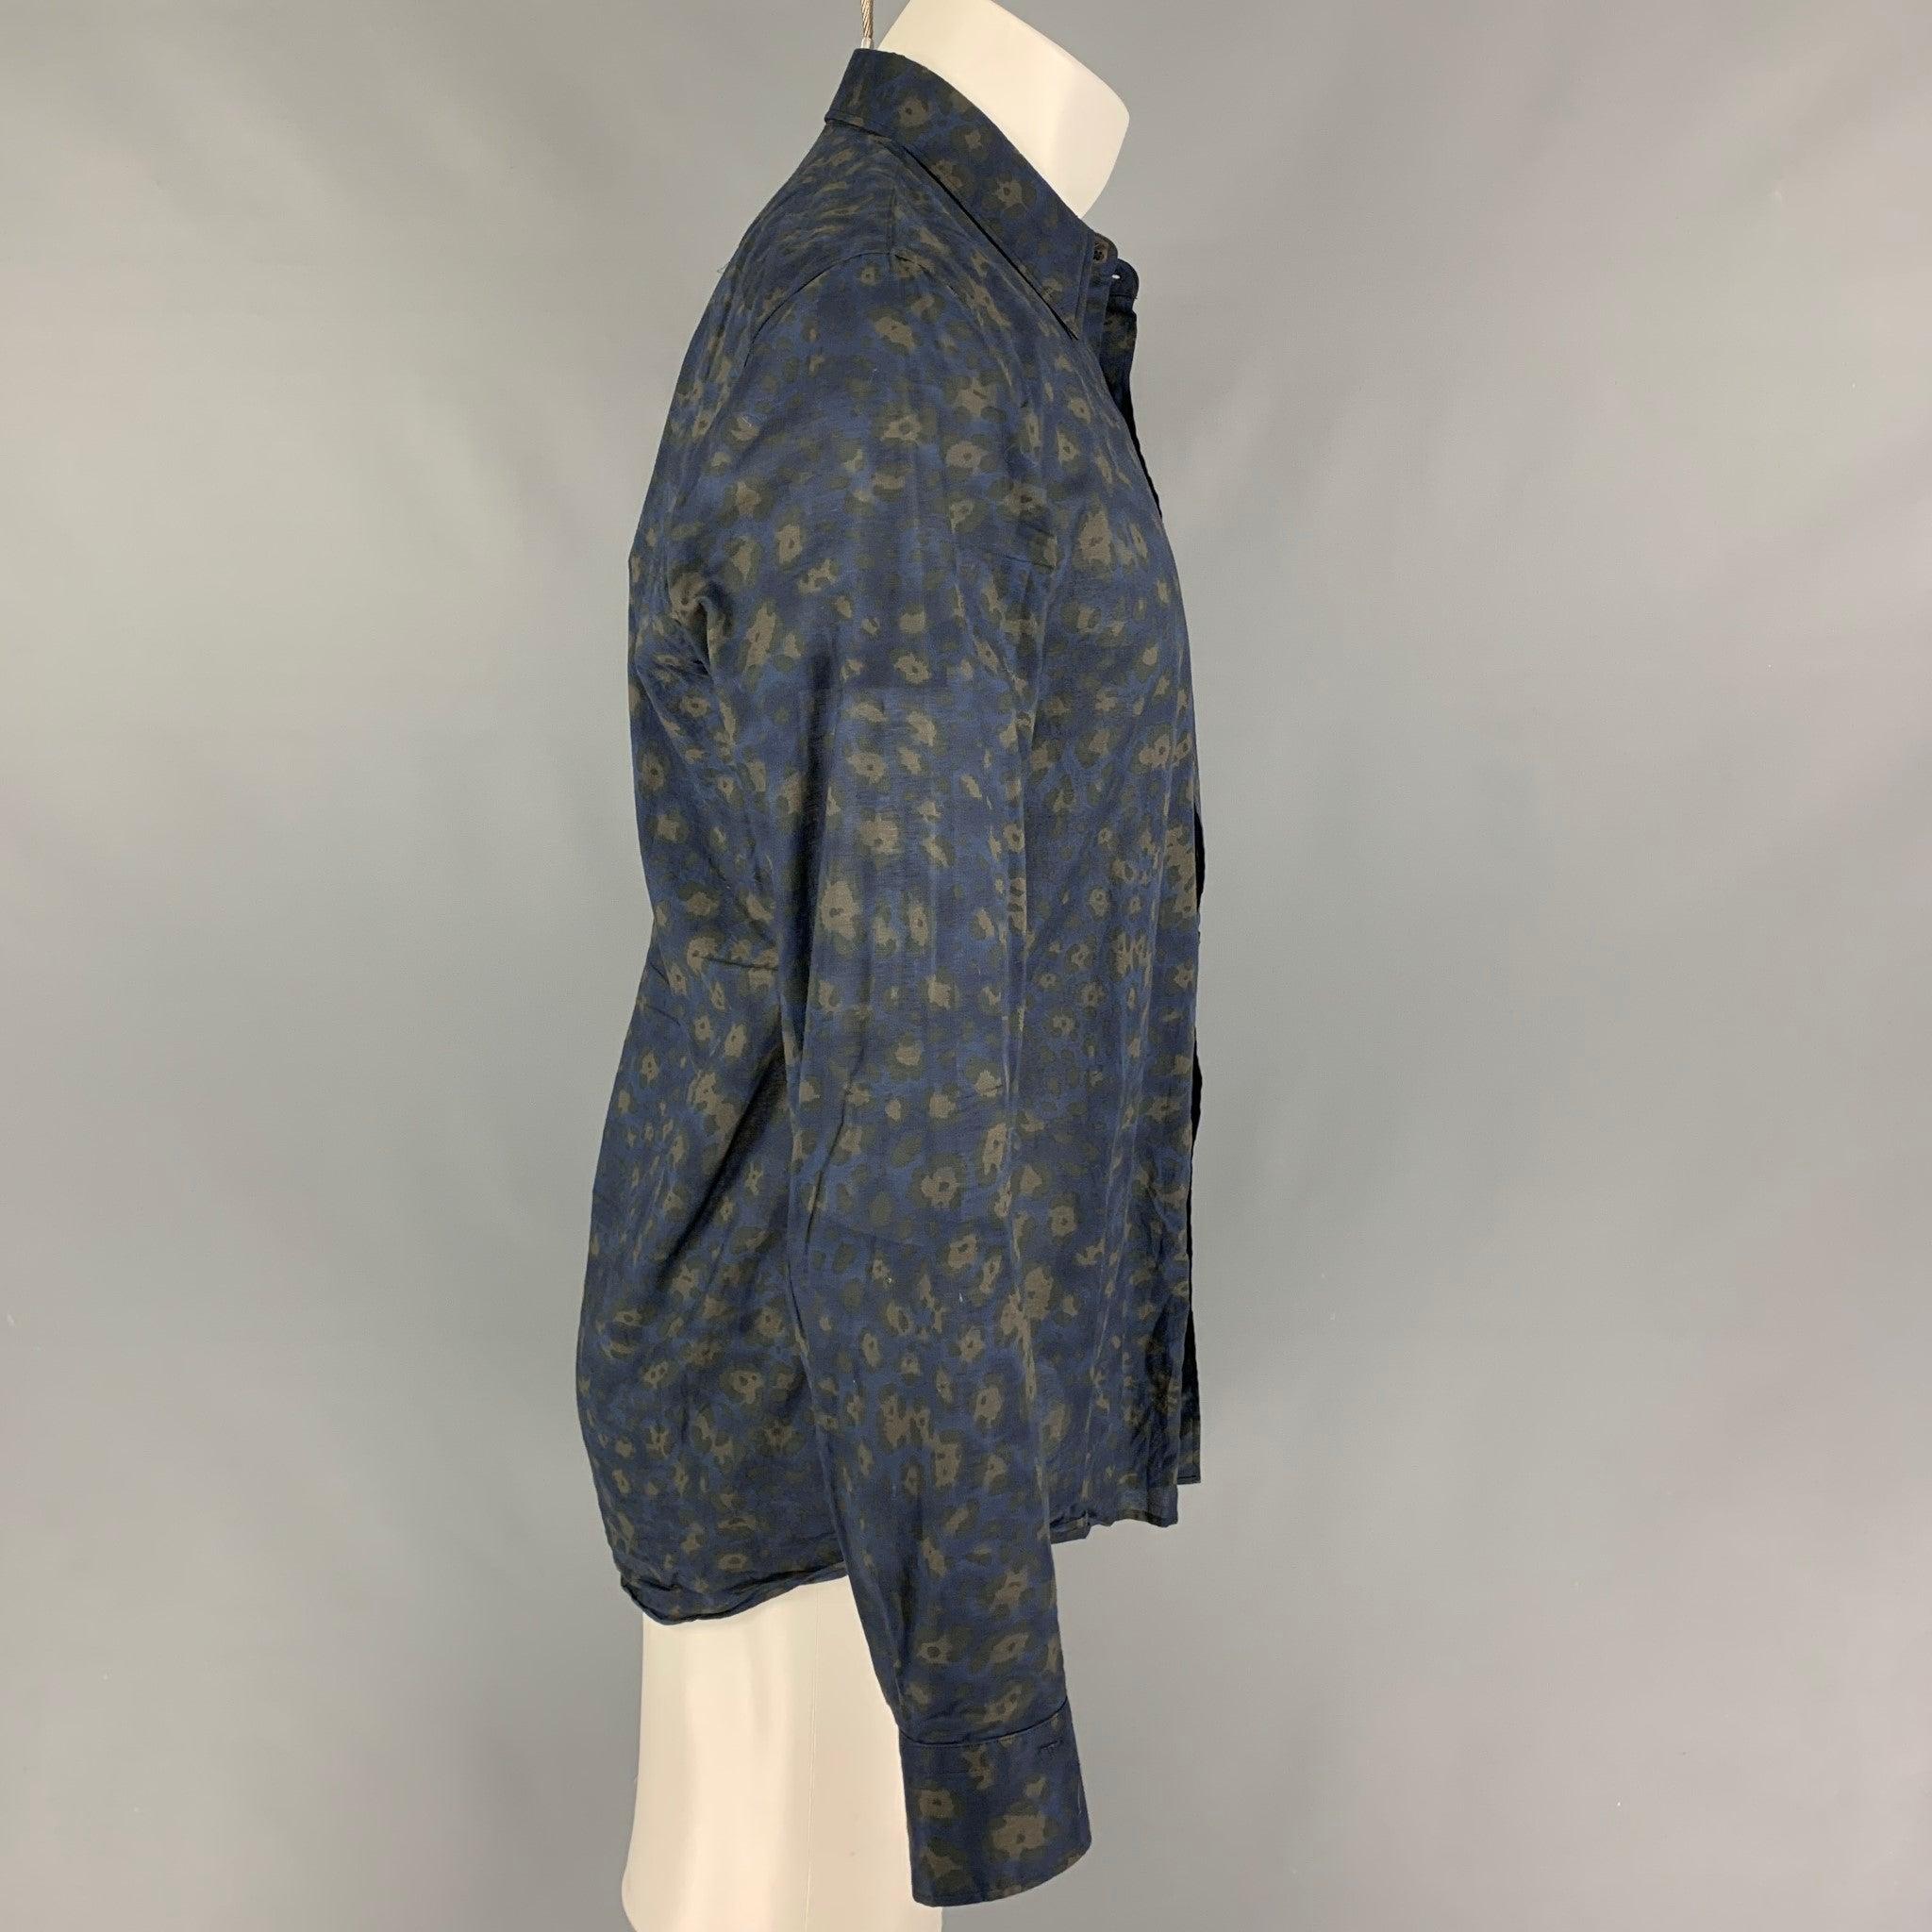 DRIES VAN NOTEN long sleeve shirt comes in a blue abstract floral cotton featuring a spread collar, patch pocket, and a button up closure.
Very Good
Pre-Owned Condition. 

Marked:   50 

Measurements: 
 
Shoulder: 18 inches  Chest: 40 inches 